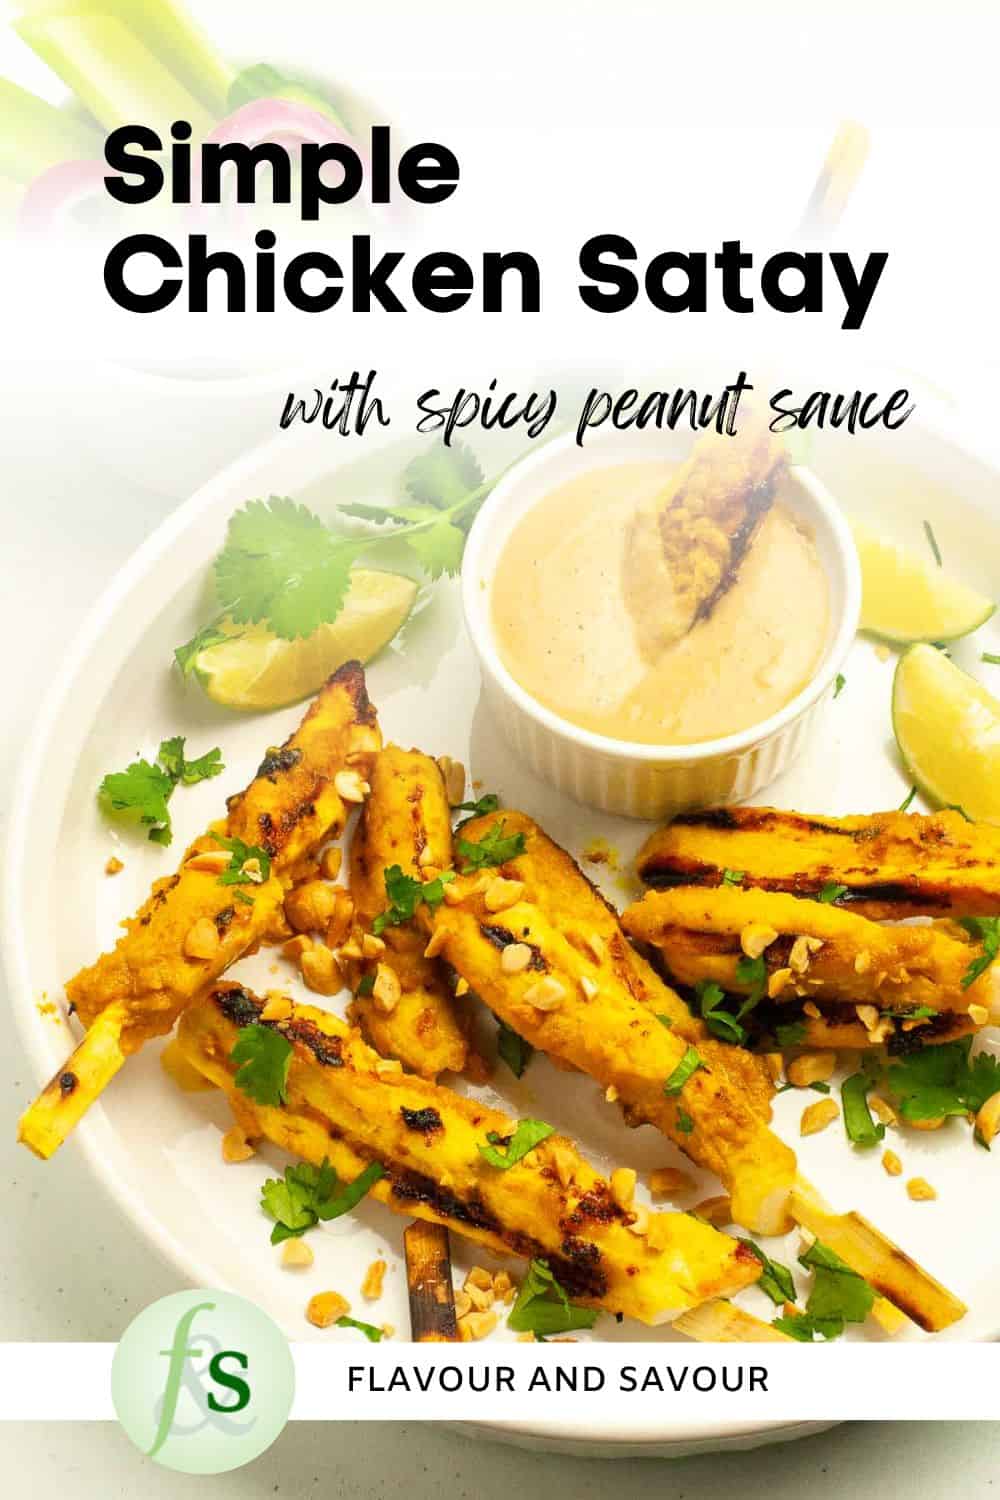 Image with text for chicken satay with peanut sauce.